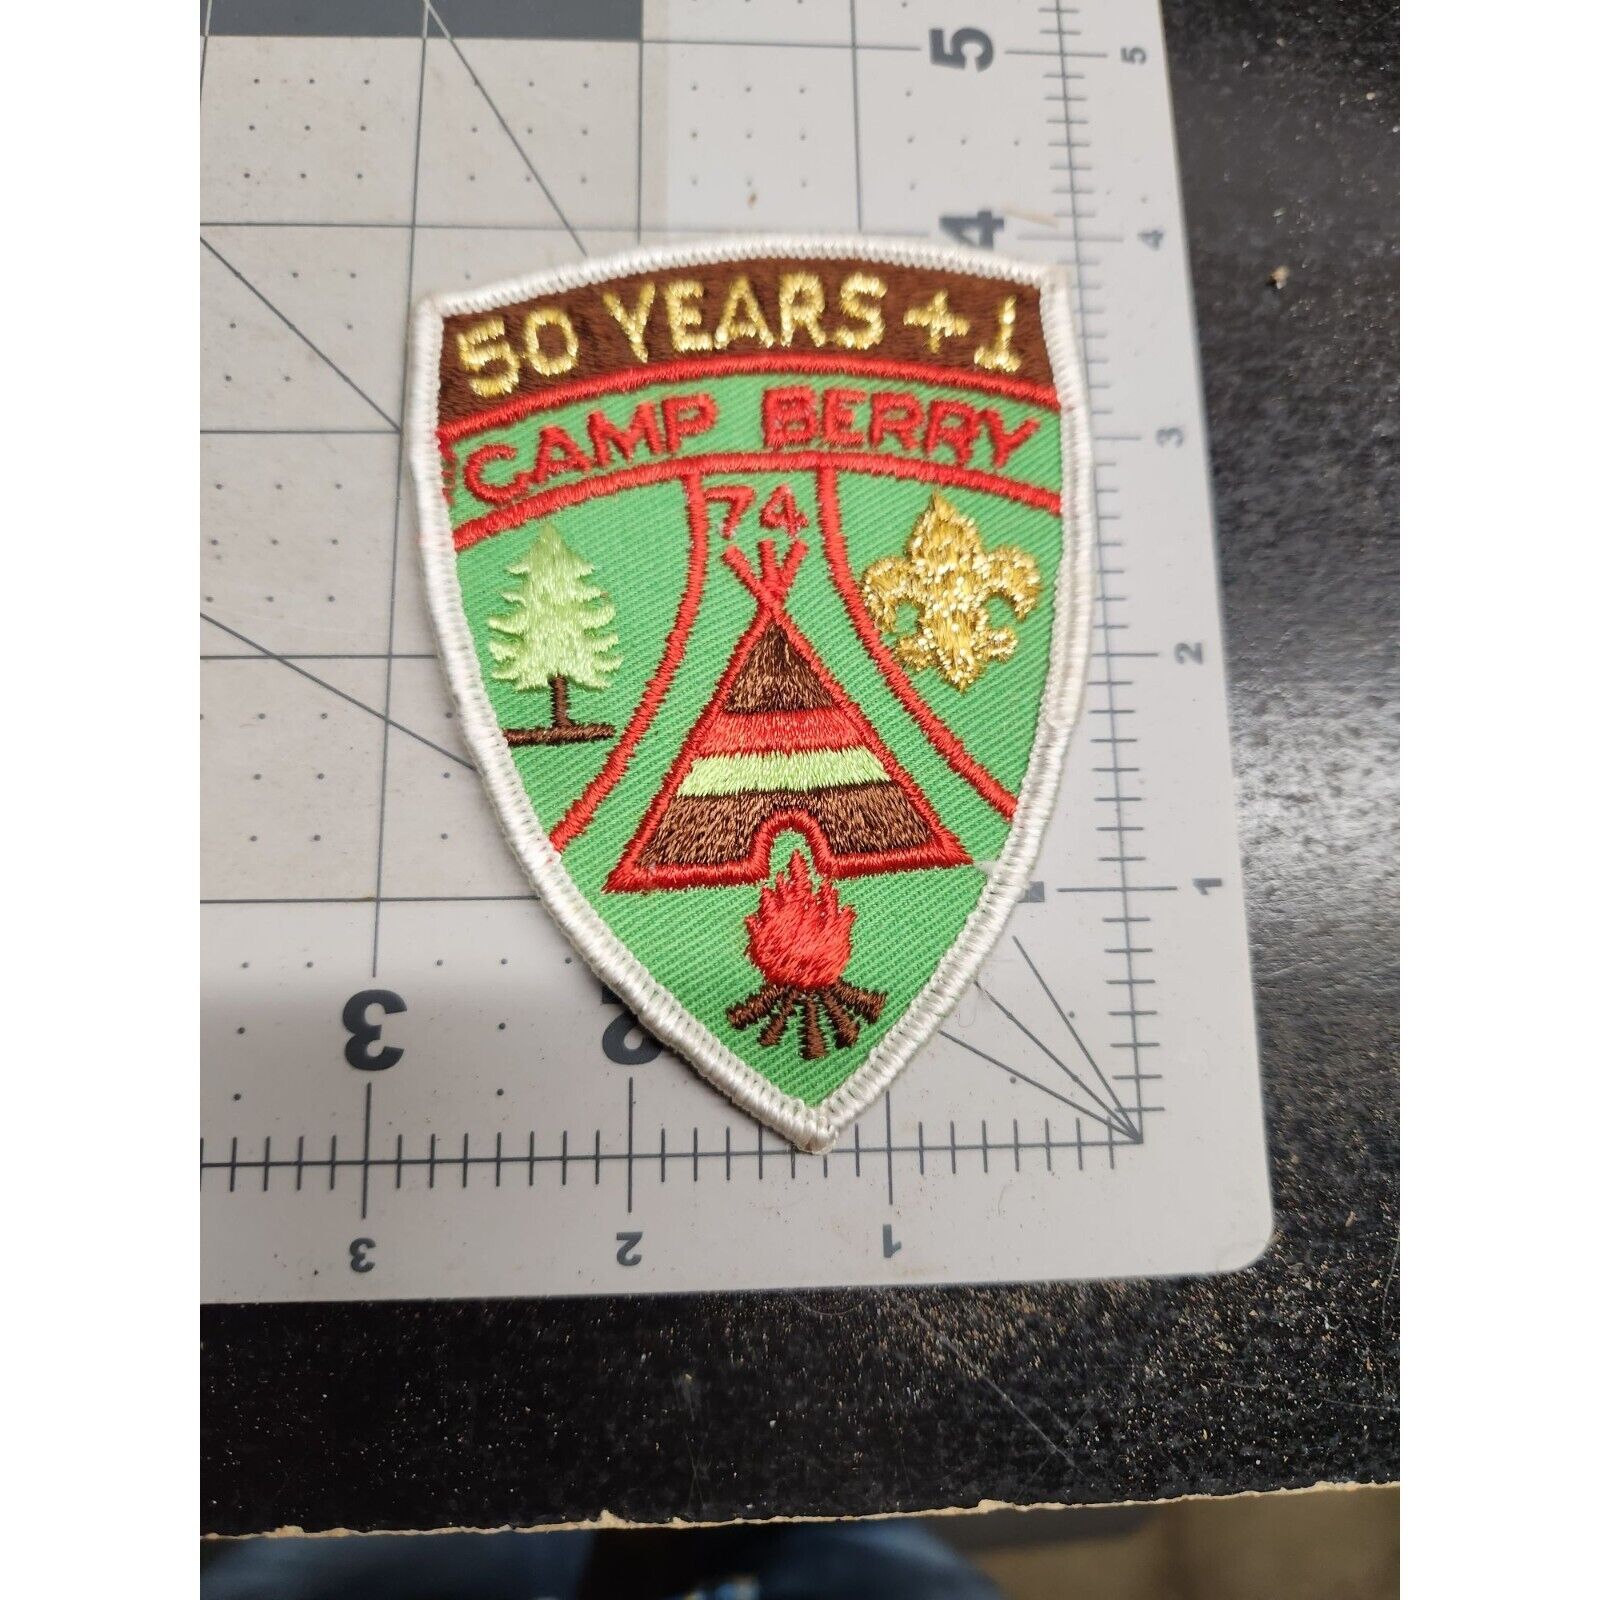 1974 Camp Berry 50 Years + 1 Boy Scouts of America Patch